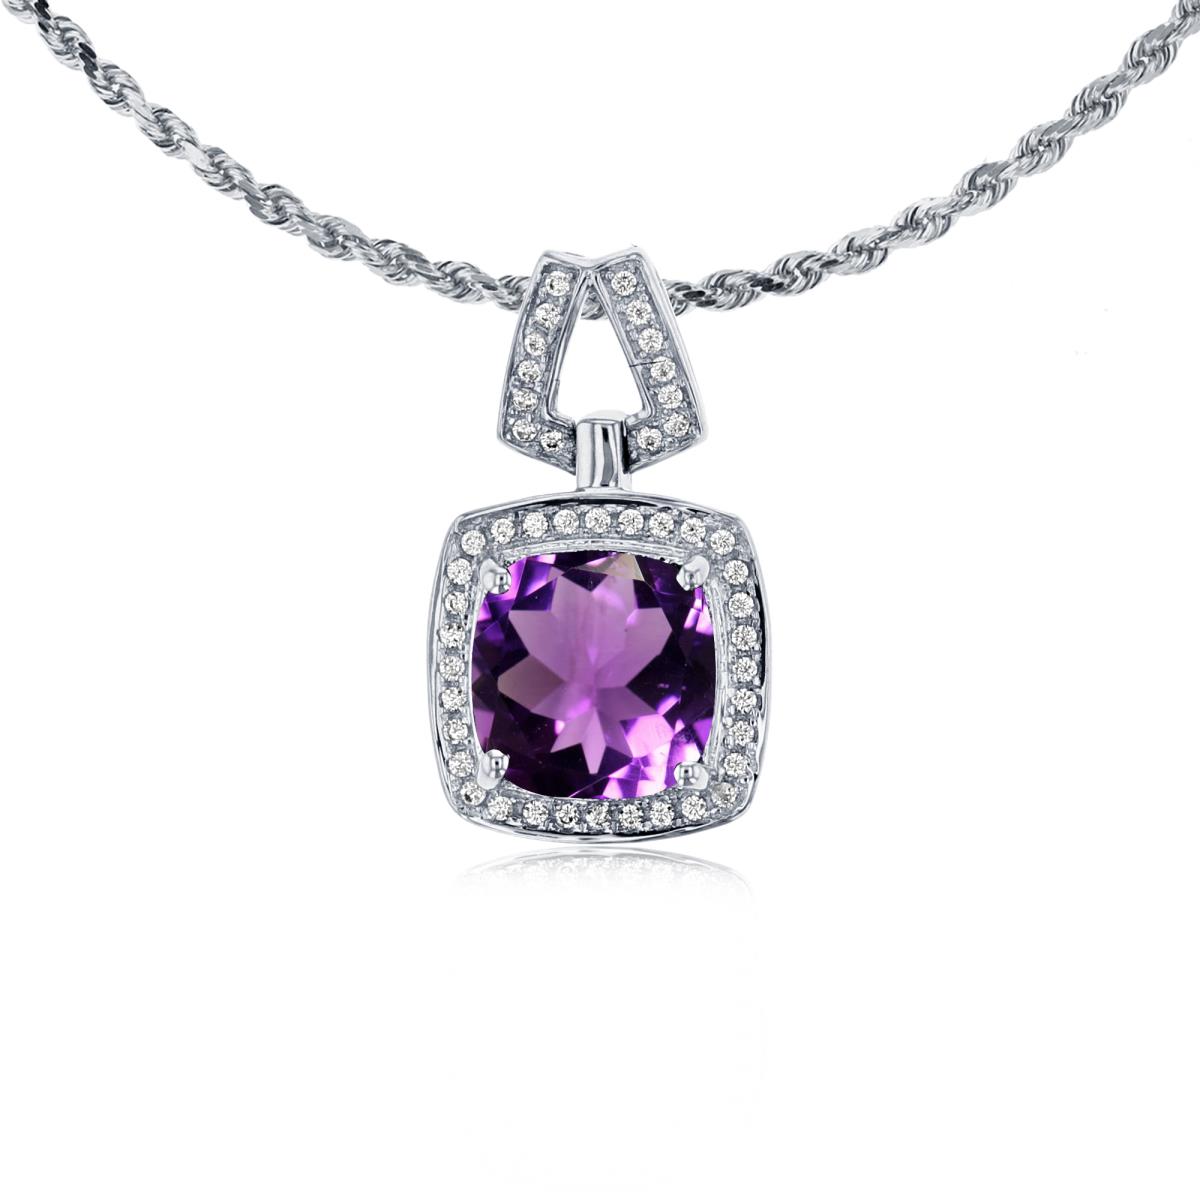 10K White Gold 7mm Cushion Amethyst & 0.10 CTTW Diamond Halo 18" Rope Chain Necklace